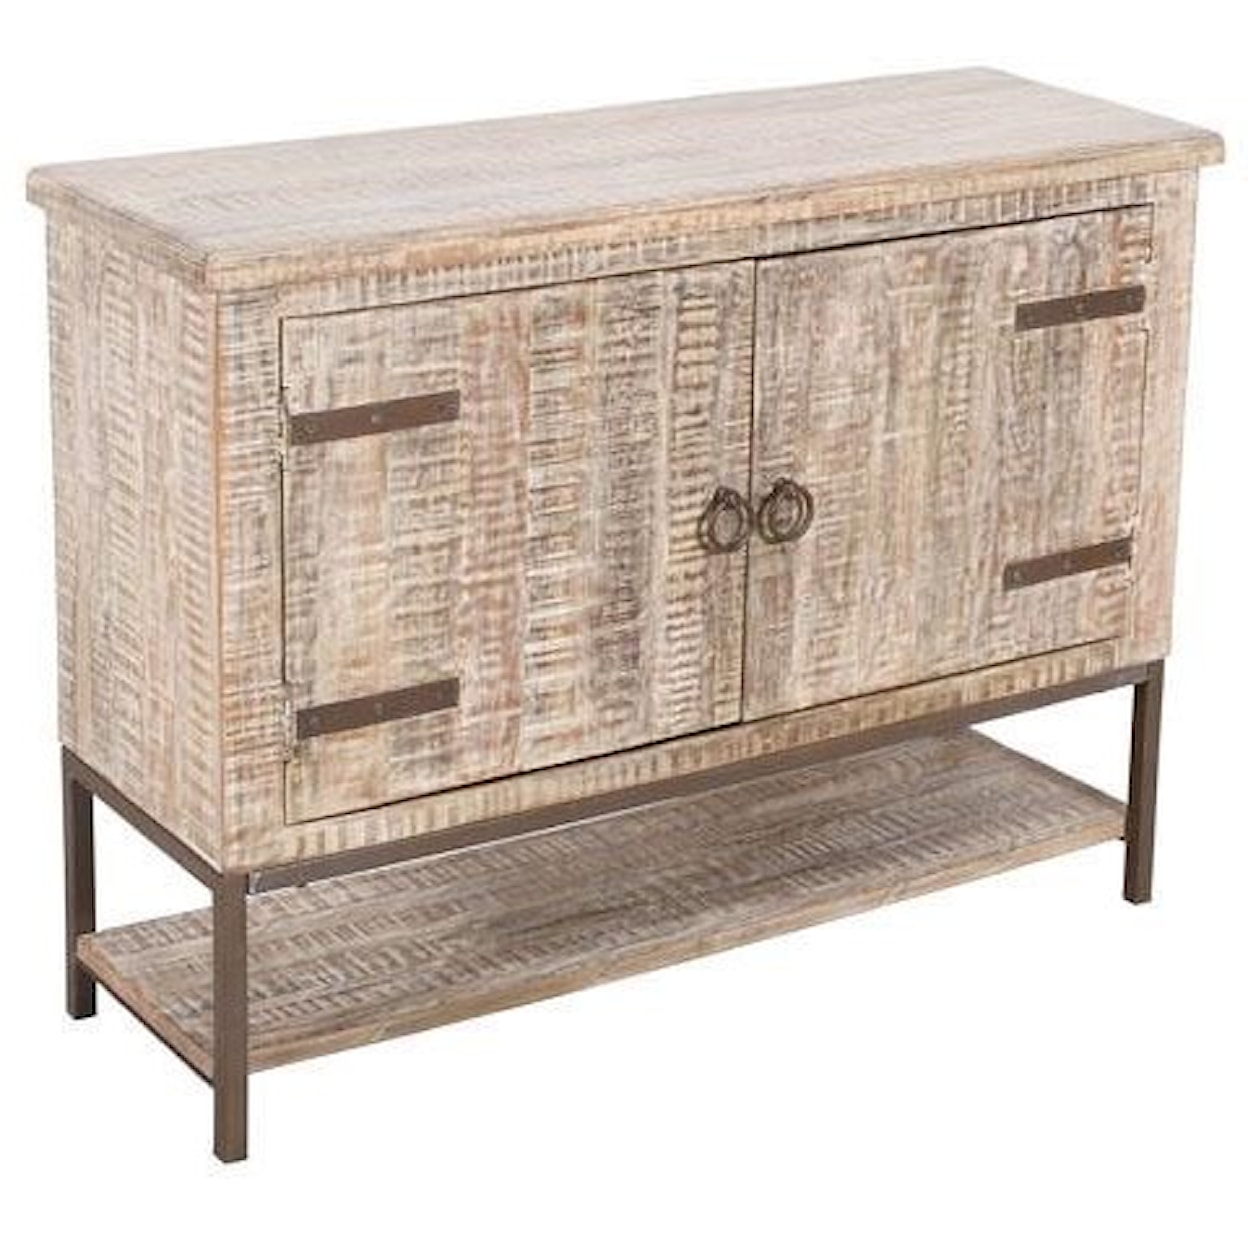 Signature Design by Ashley Laddford Accent Cabinet